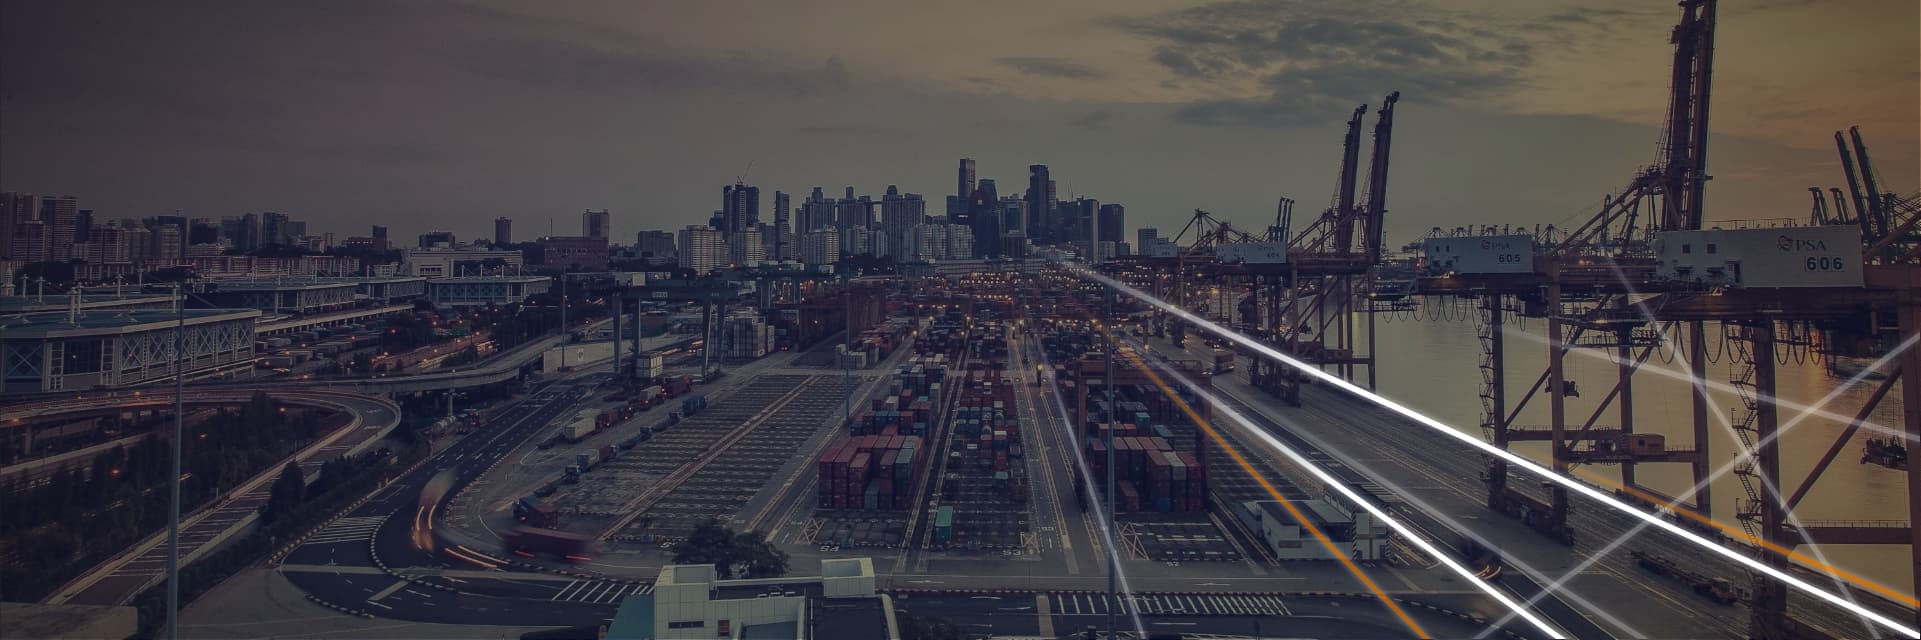 Shipping port with motion graphic